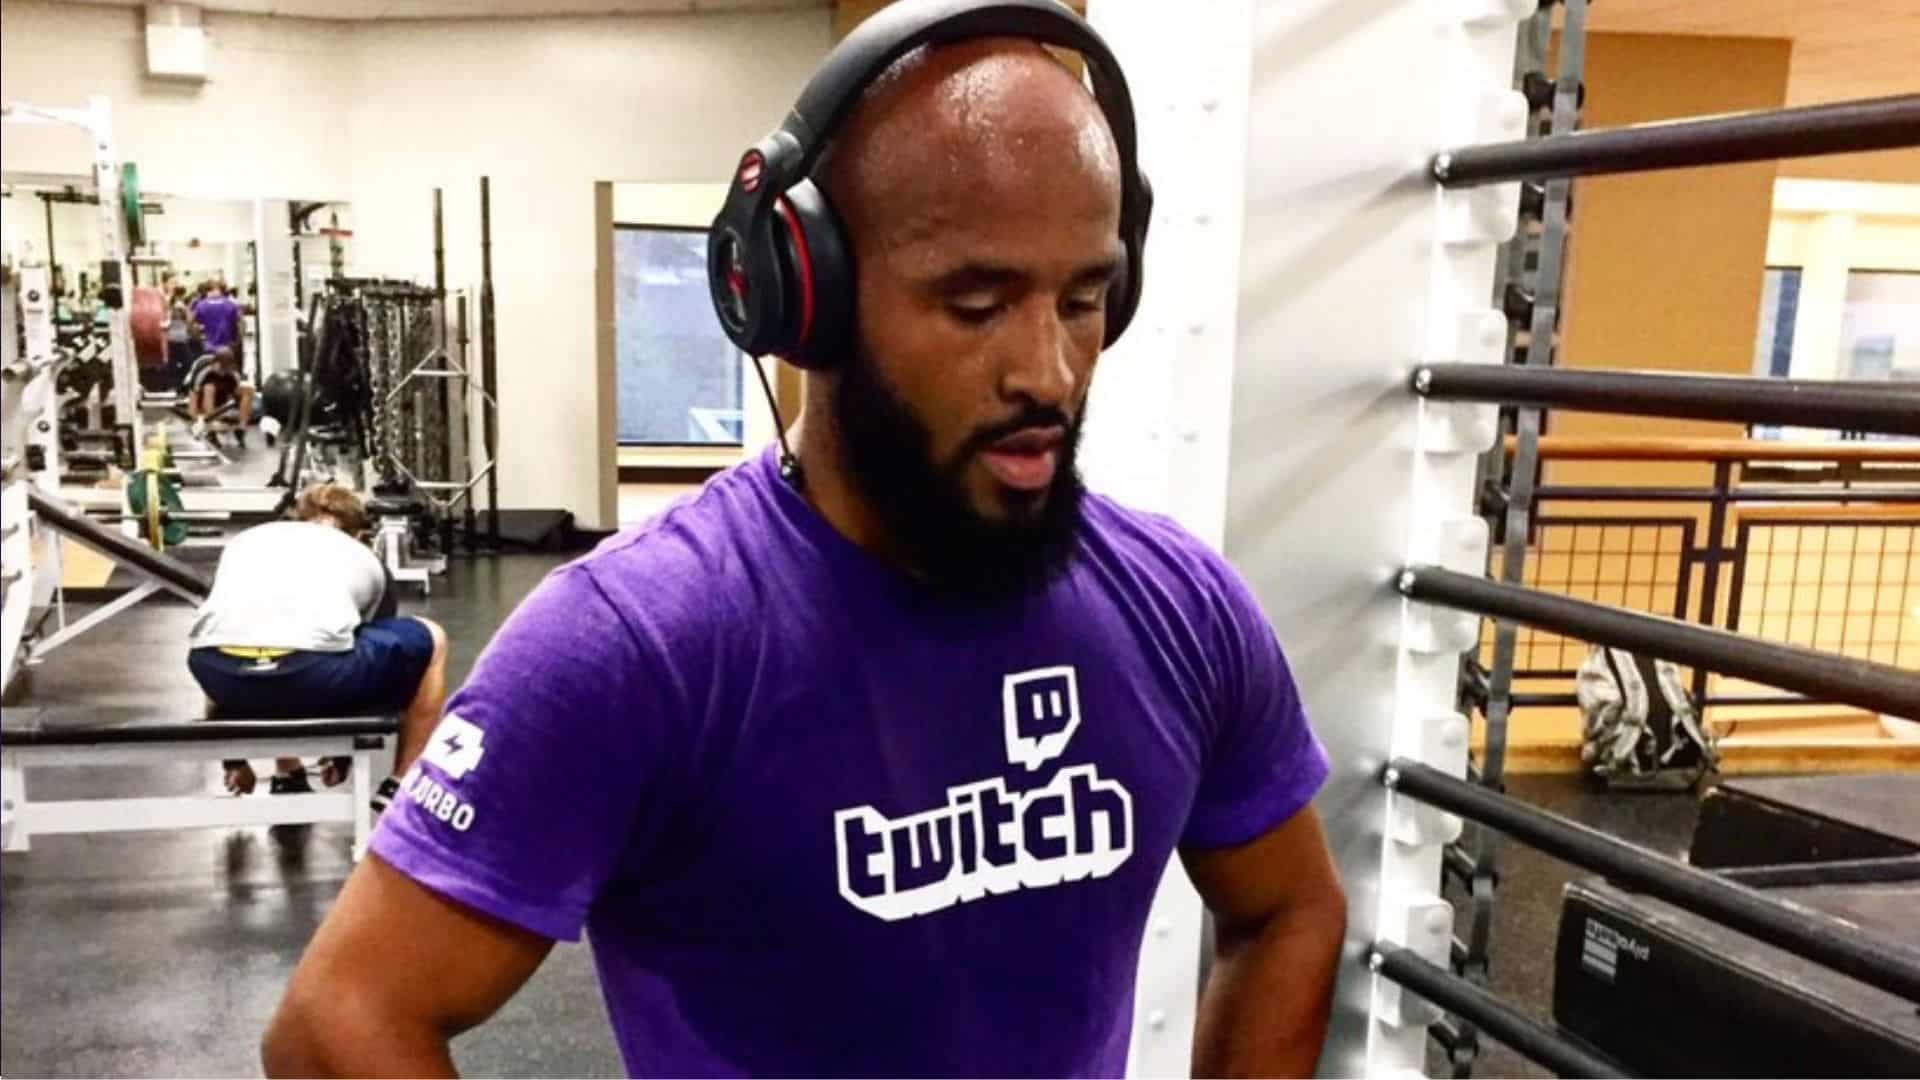 Demetrious Johnson working out in a Twitch shirt